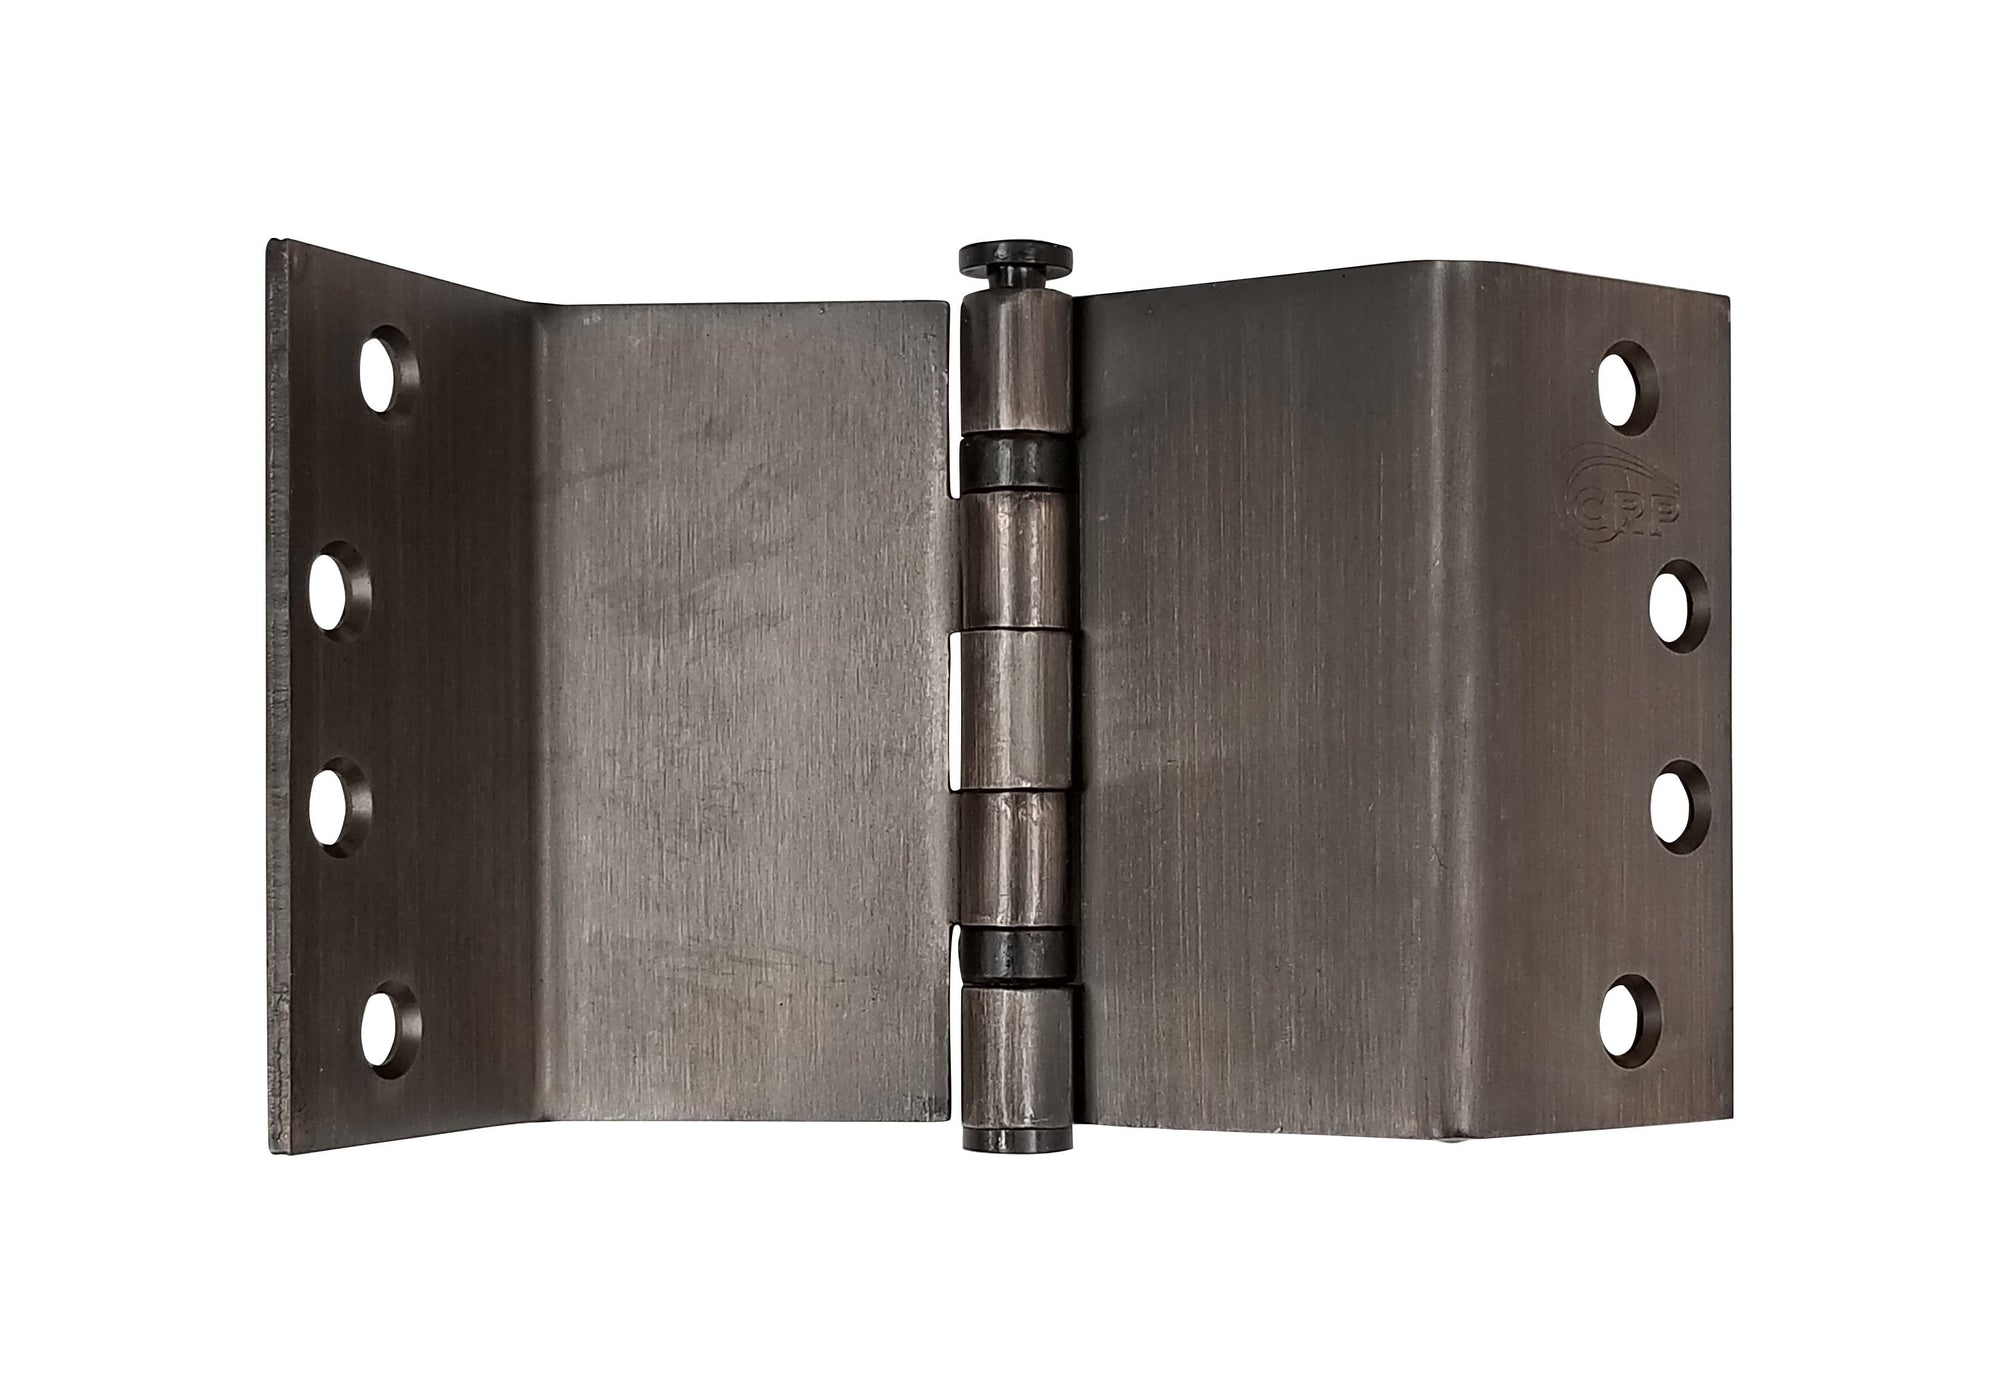 Swing Clear Expandable Ball Bearing Door Hinges - 4" Inches Square - Full Mortise - Multiple Finishes Available - Sold Individually